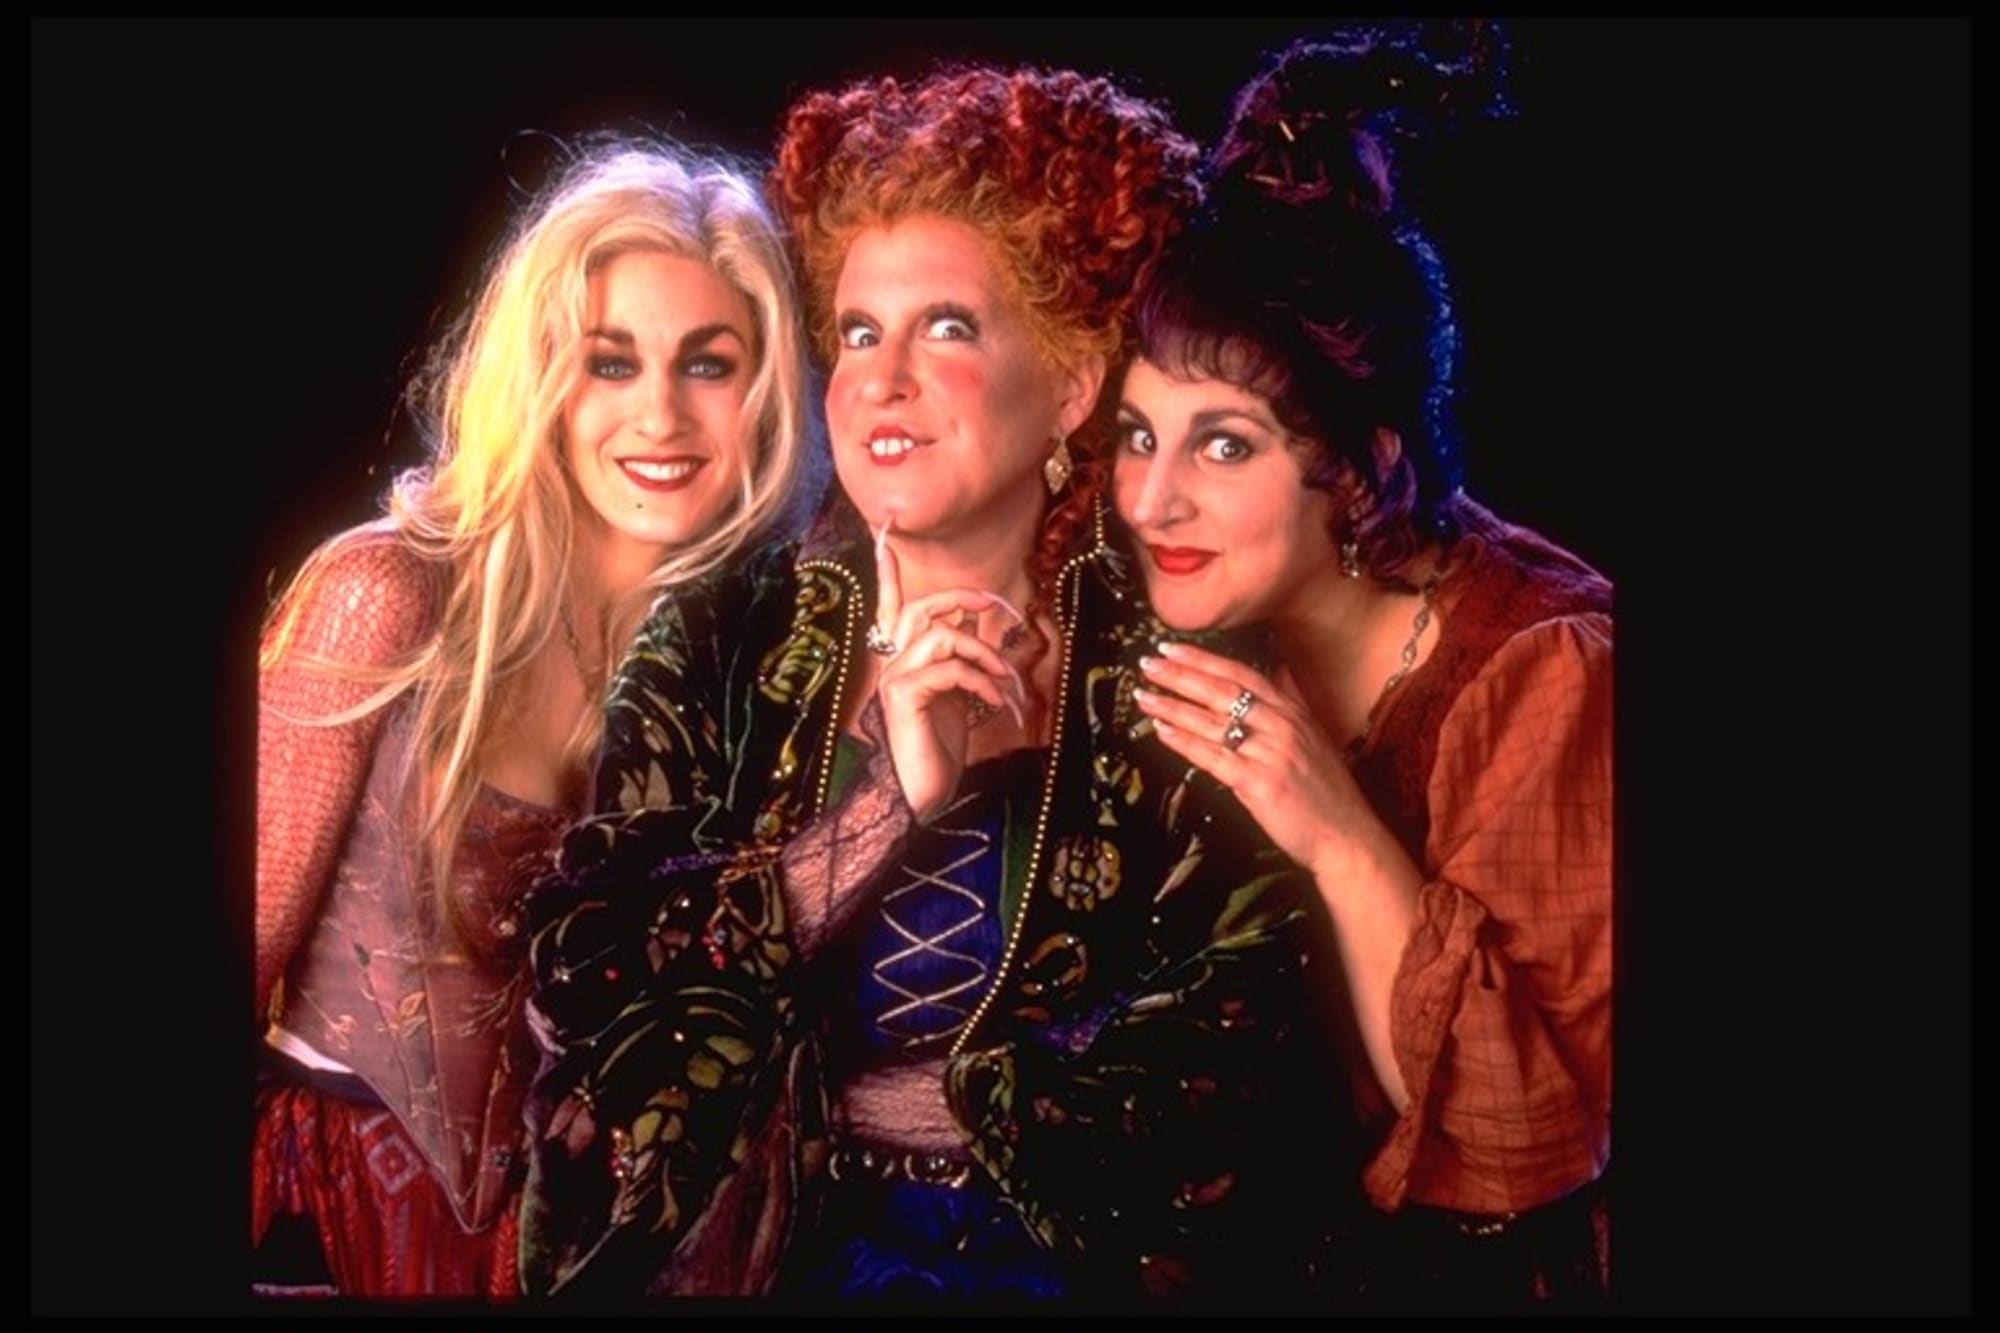 ColourPop is releasing a new Hocus Pocus collection for 2021